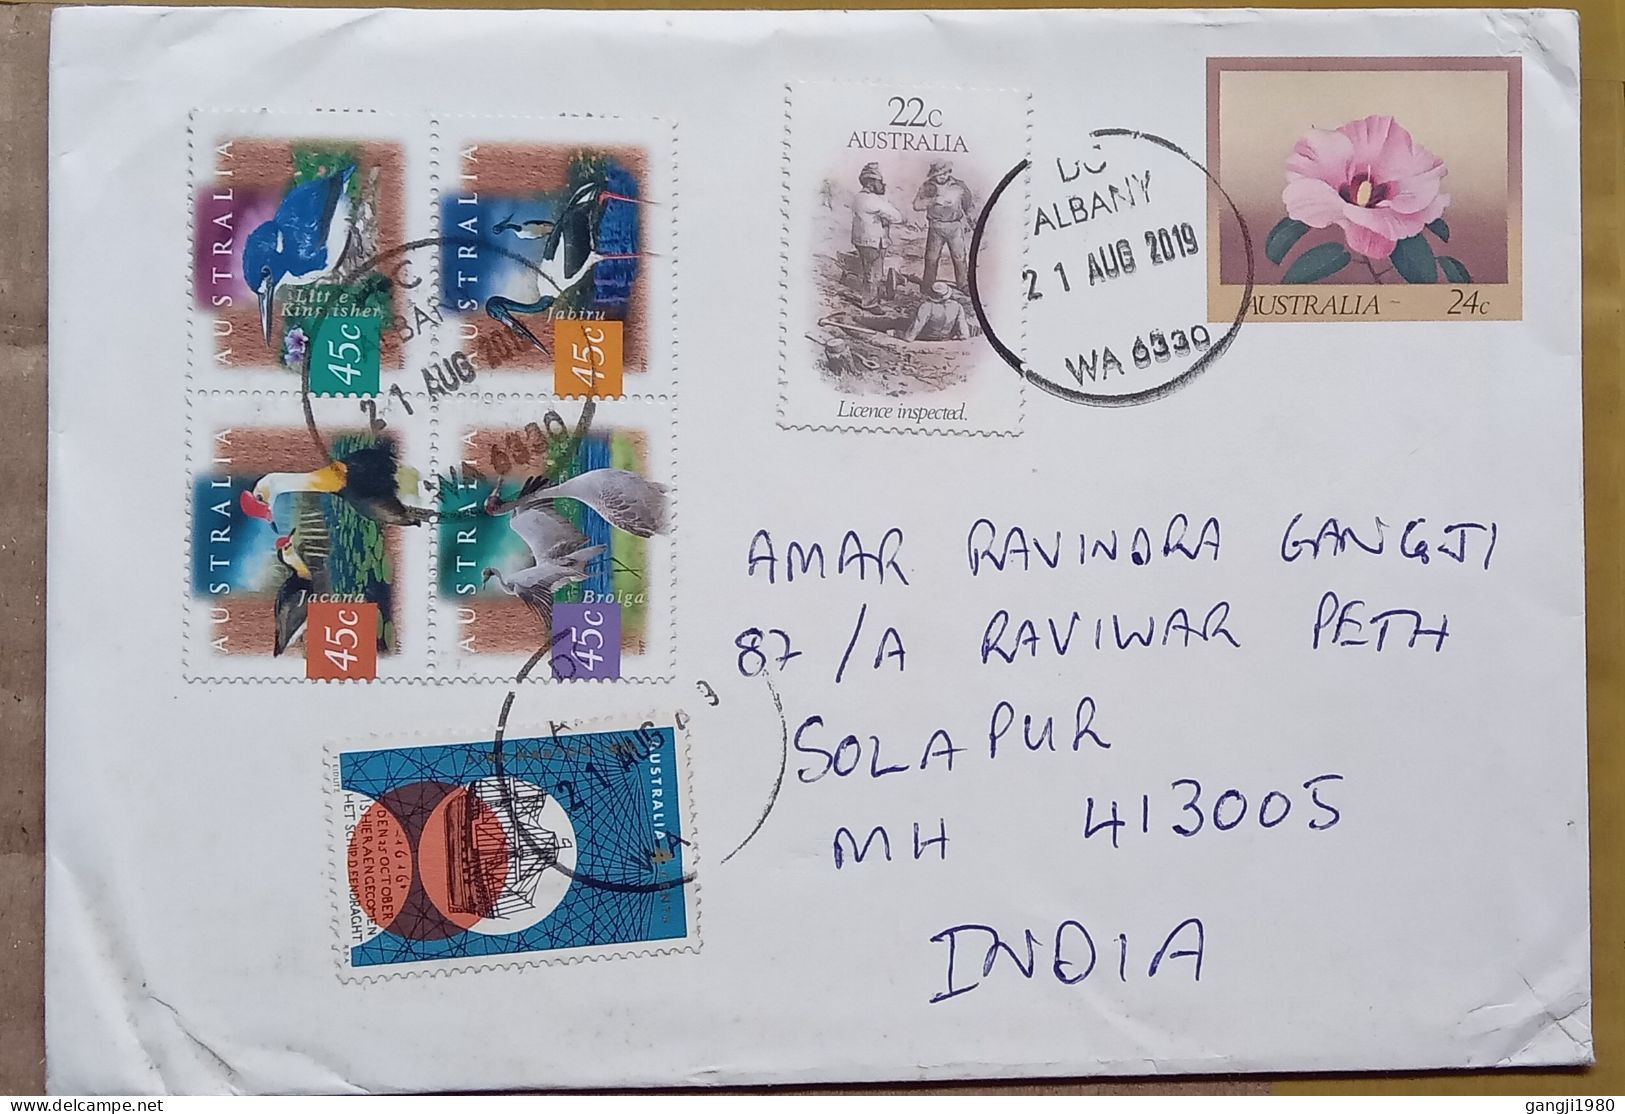 AUSTRALIA-2019, STATIONERY COVER, USED TO INDIA, FLOWER, BIRD, 6 DIFF, DIRK HARTOGE SHIP, LICENCE INSPECTED, ALBANY CITY - Cartas & Documentos